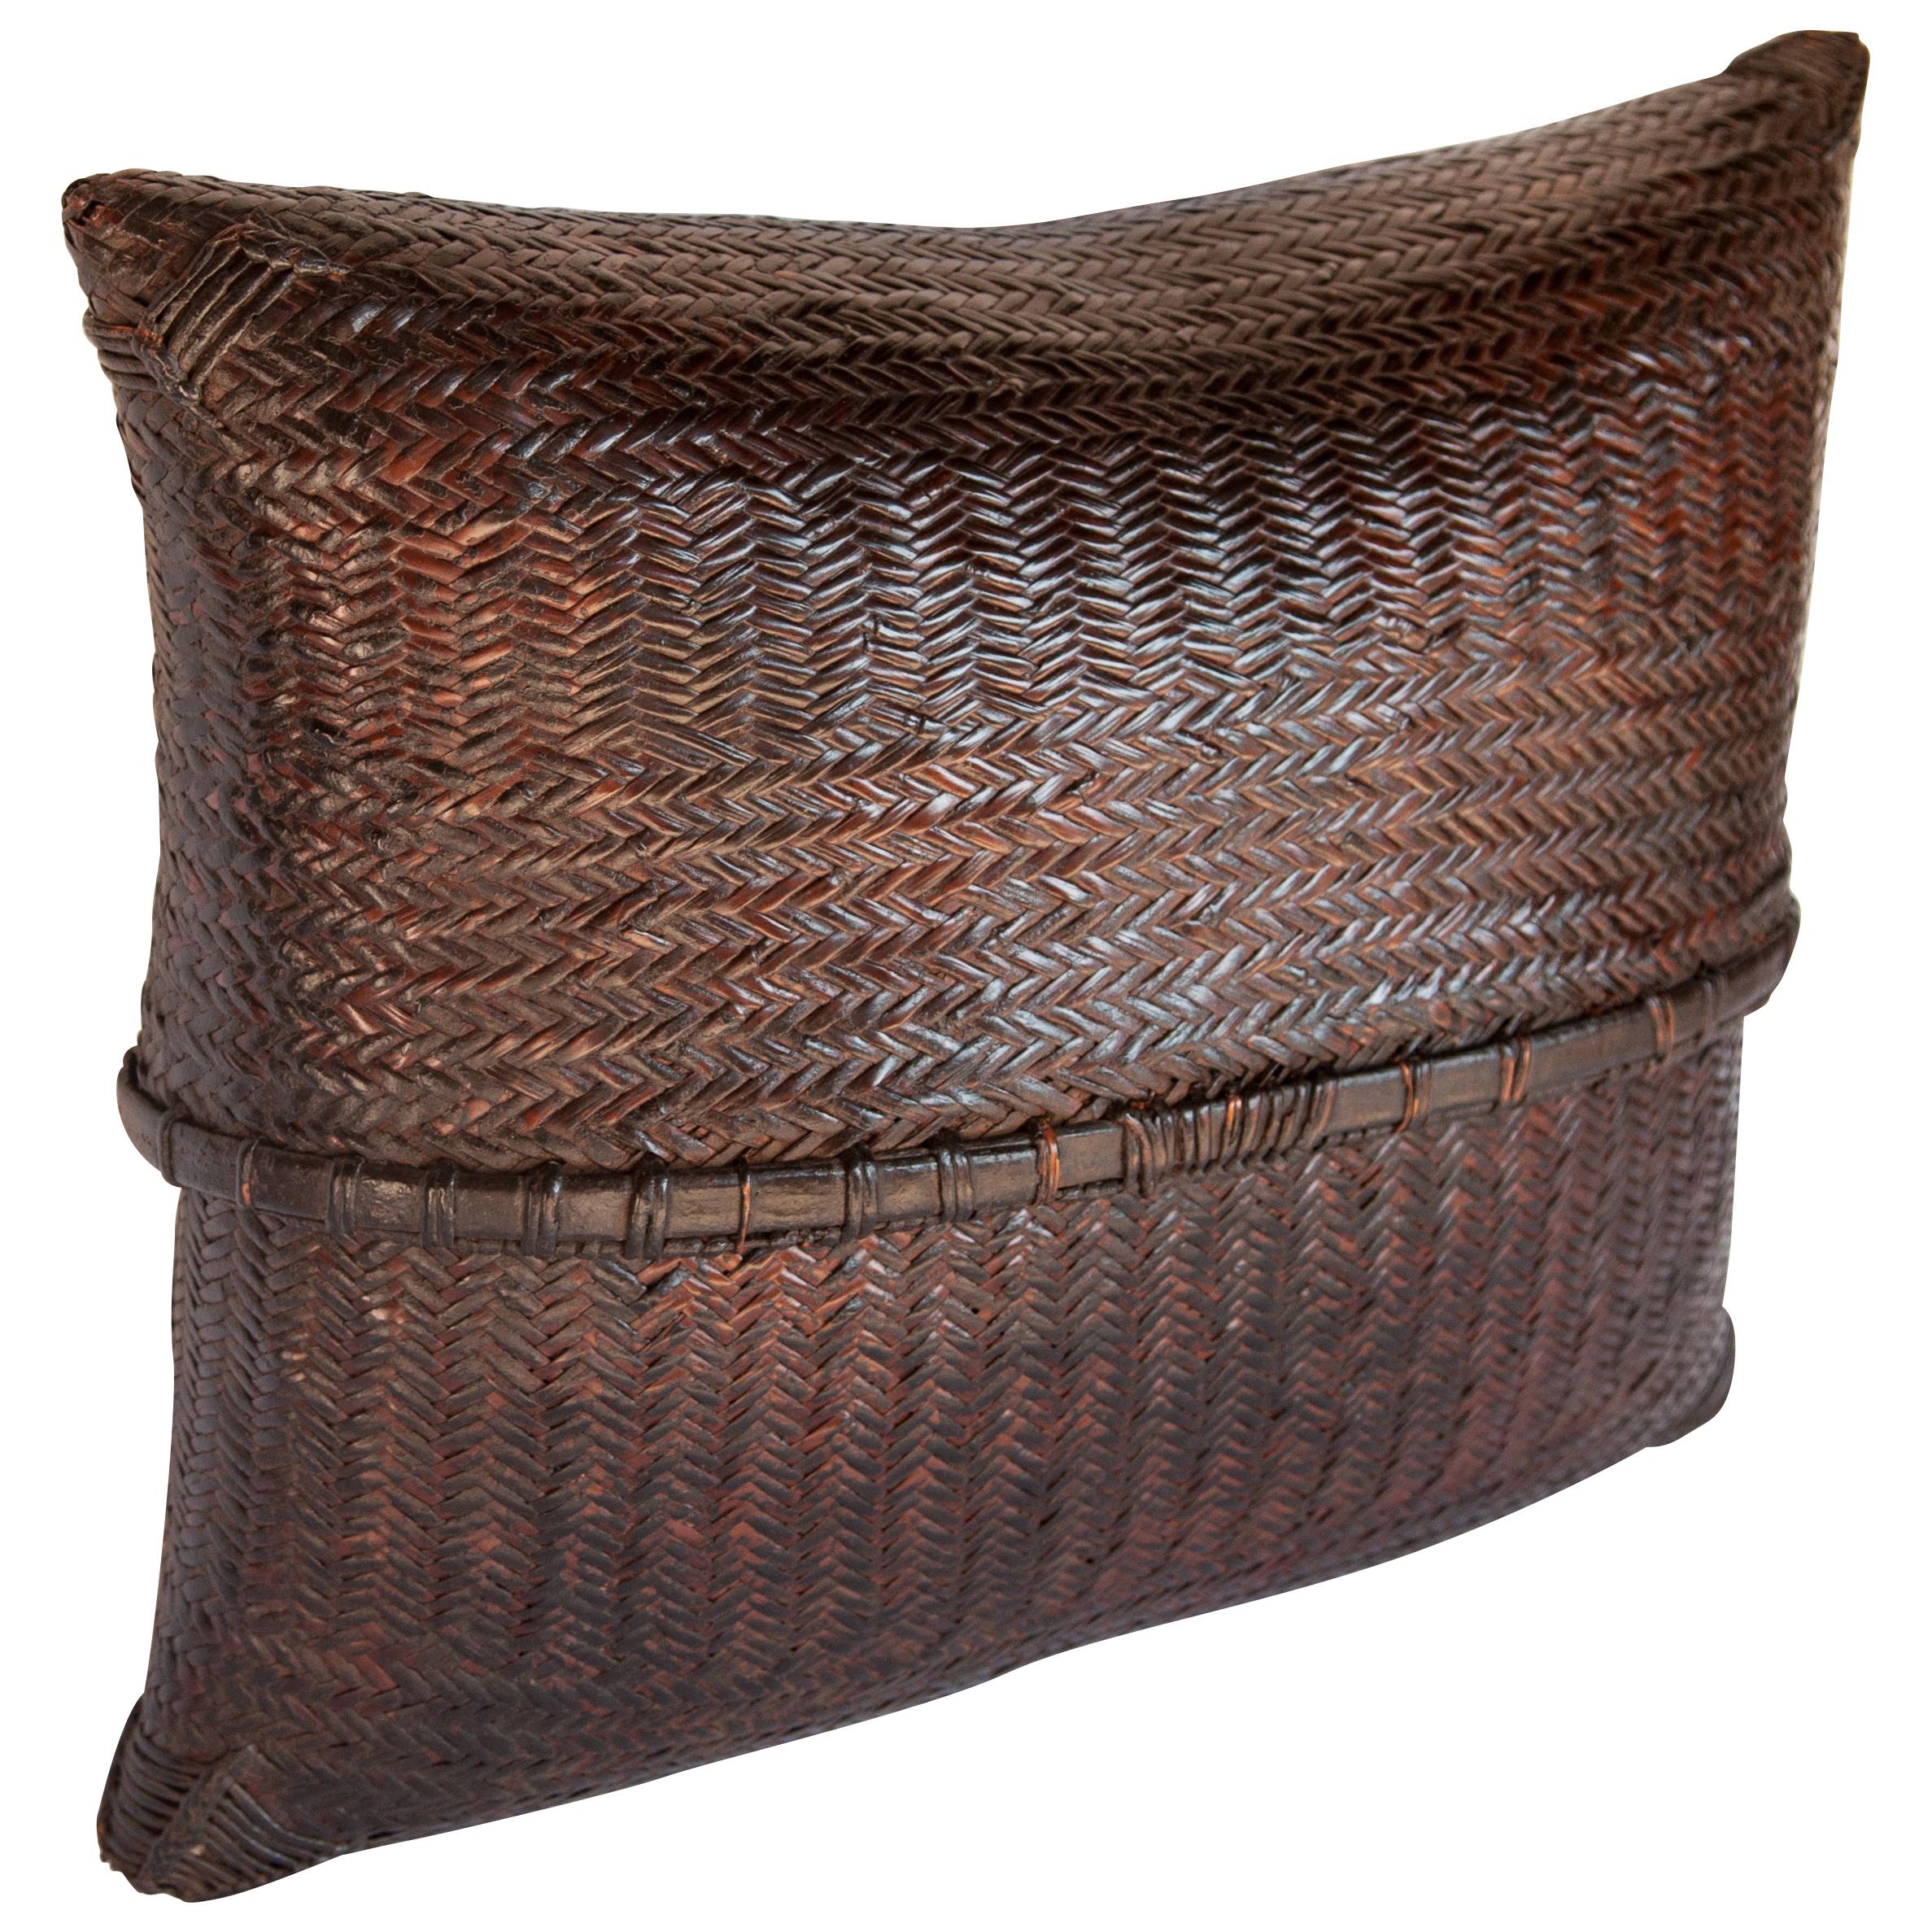 Large Vintage Double Weave Pouch Basket, Nepal, Mid-20th Century